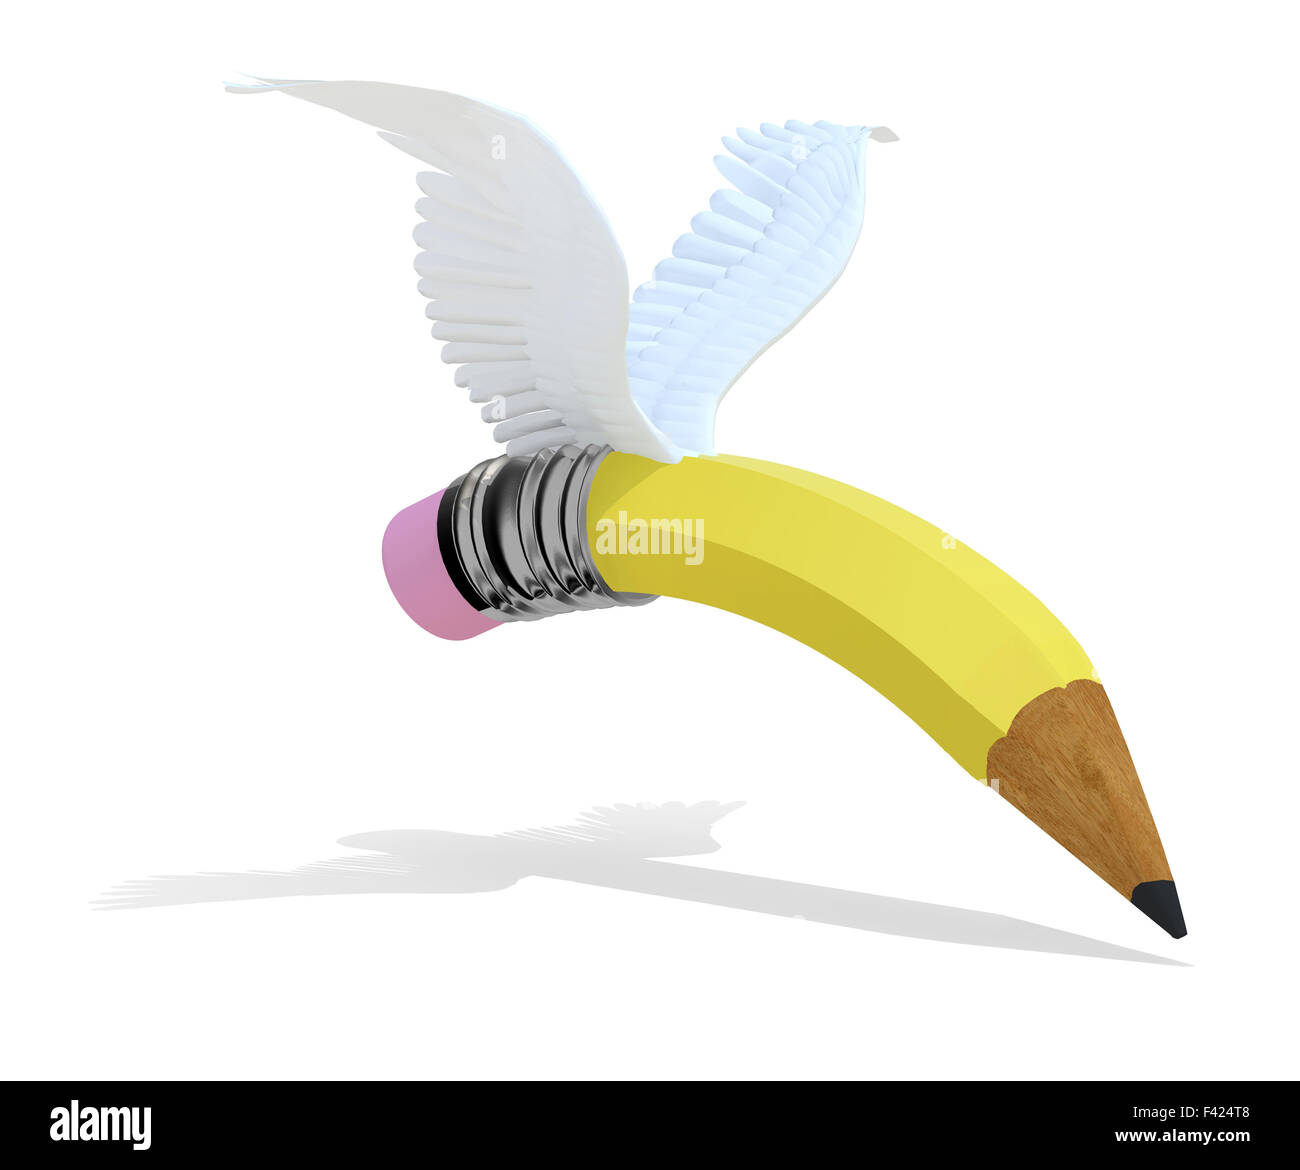 Pencil with wings and shadow, 3d illustration Stock Photo